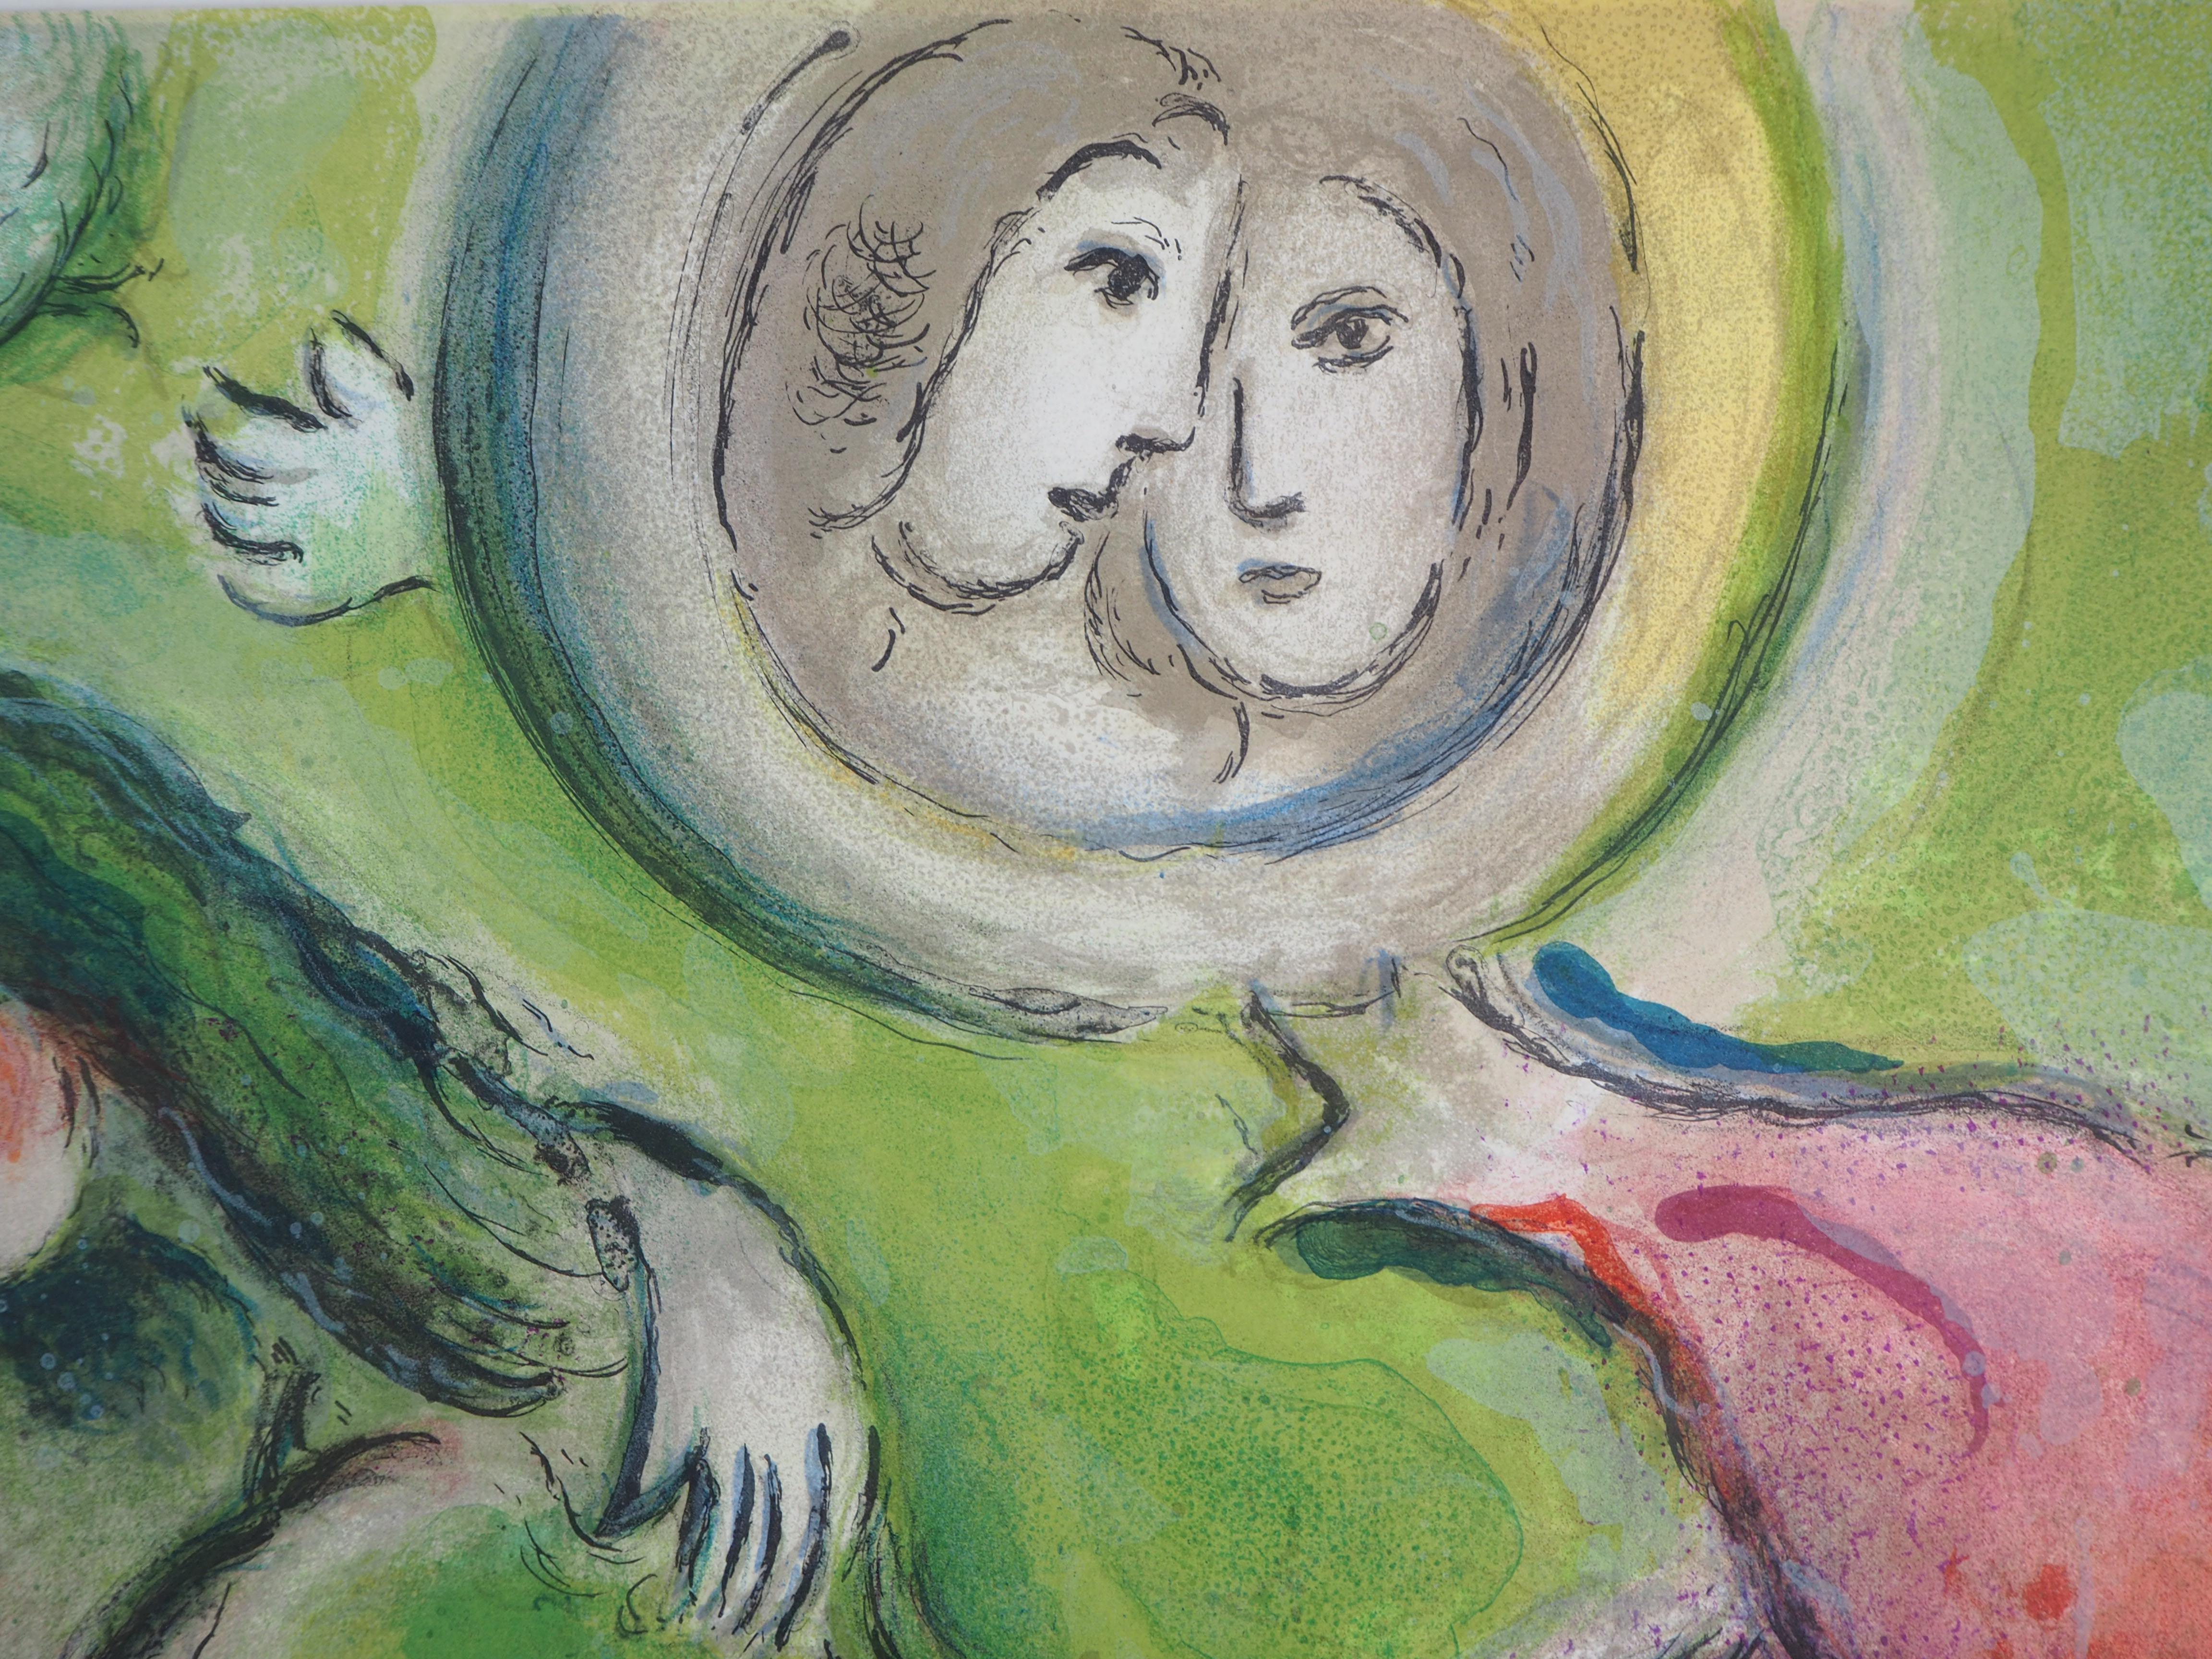 Marc Chagall (after)
Romeo and Juliet (Paris Opera), 1965

Stone lithograph
Engraved by Charles Sorlier under the supervision of Chagall
On heavy paper 64 x 99 cm (c. 26 x 40 inch)

REFERENCES : Chagall catalog raisonne of original posters, #Sorlier